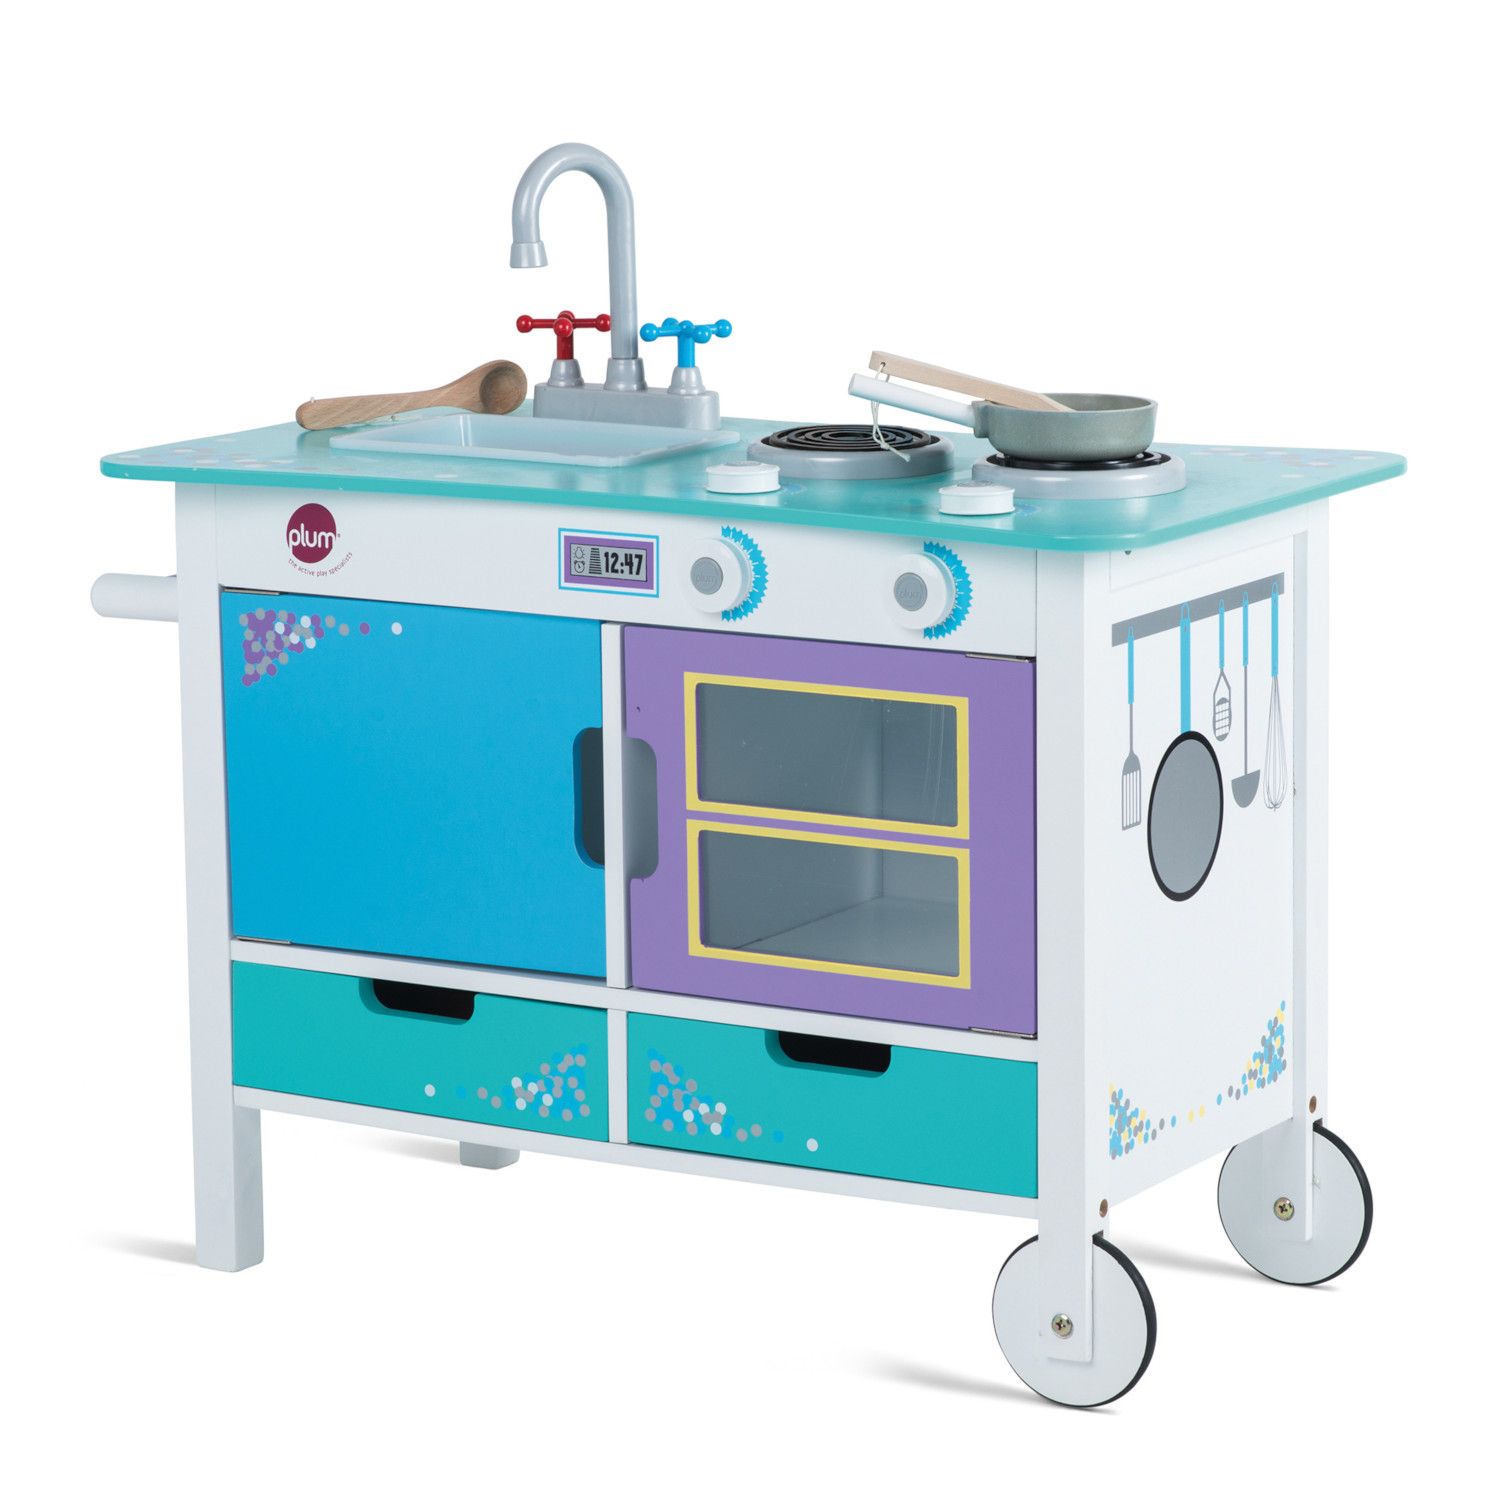 Plum Play Cook-a-Lot Trolley Wooden Play Kitchens - image 2 of 12